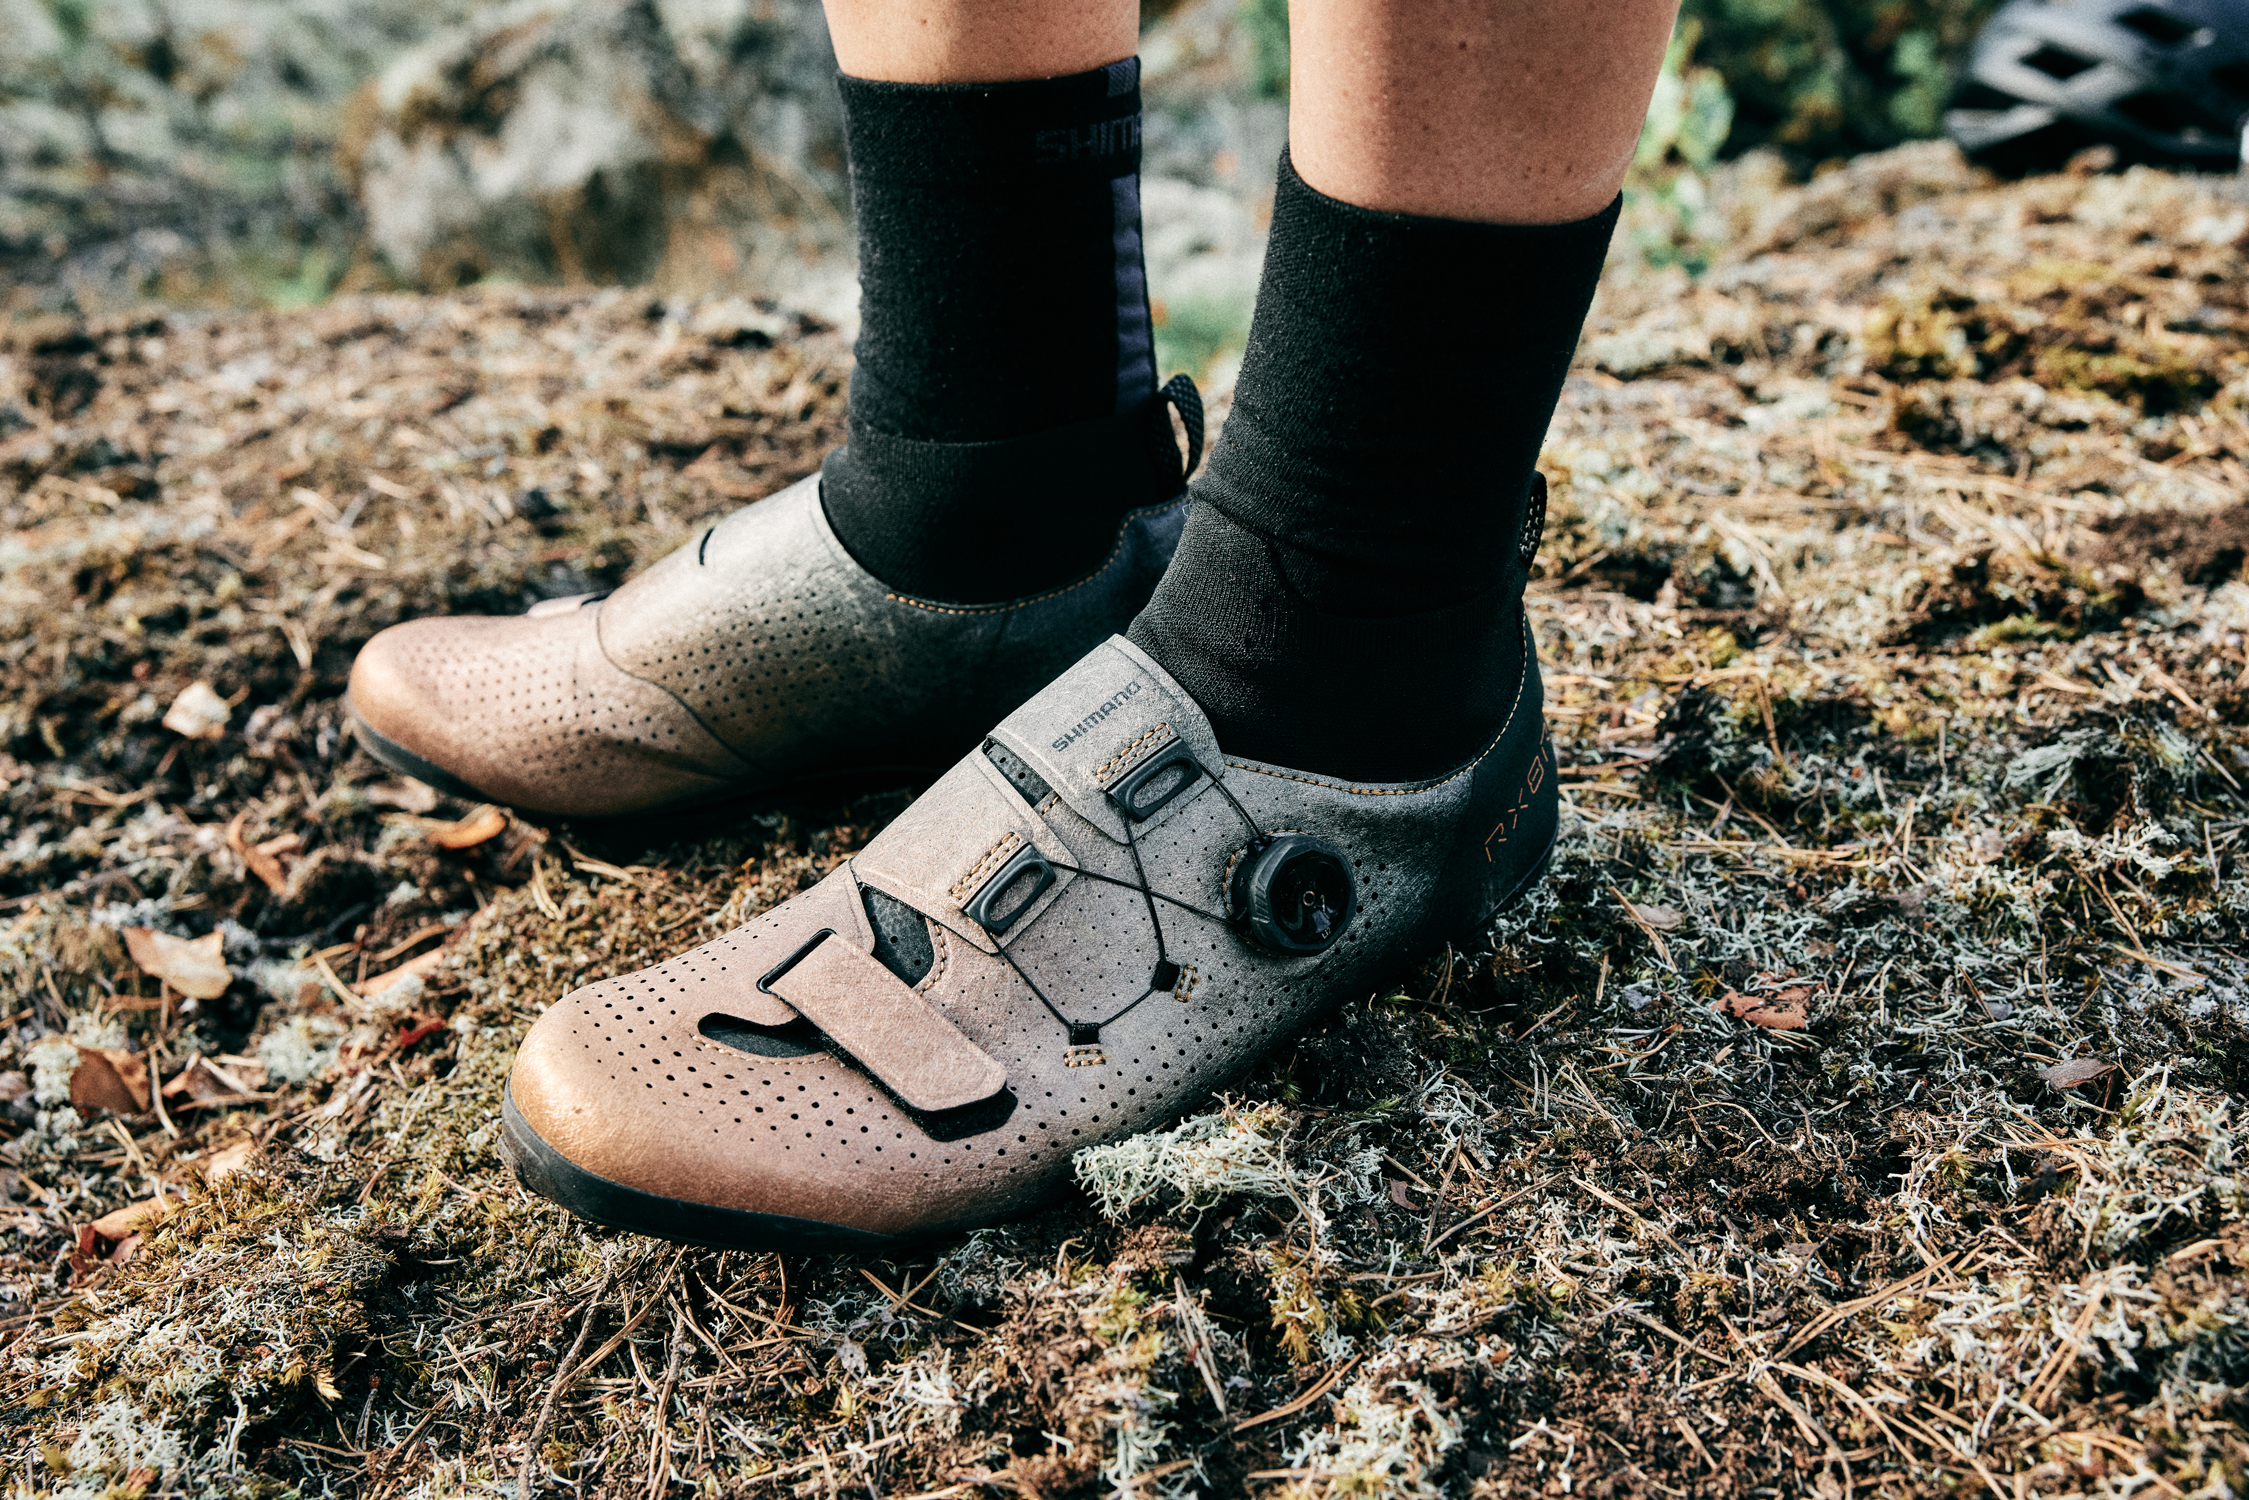 Reflective Features in Gravel Bike Shoes